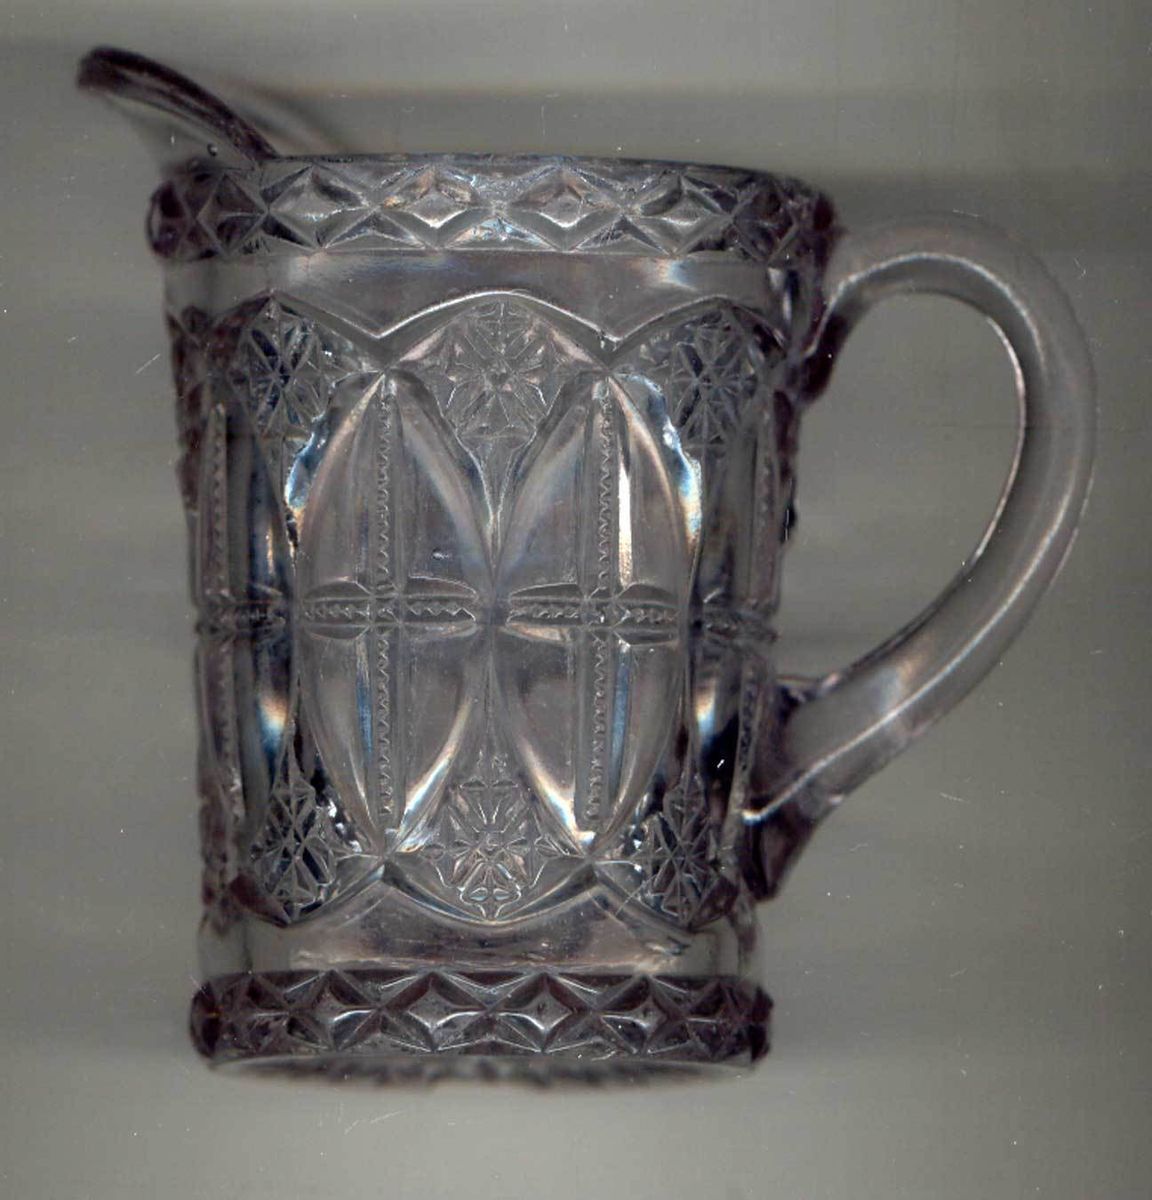 RARE Creamer Maker Unknown Pattern Unknown Need Help to Identify It